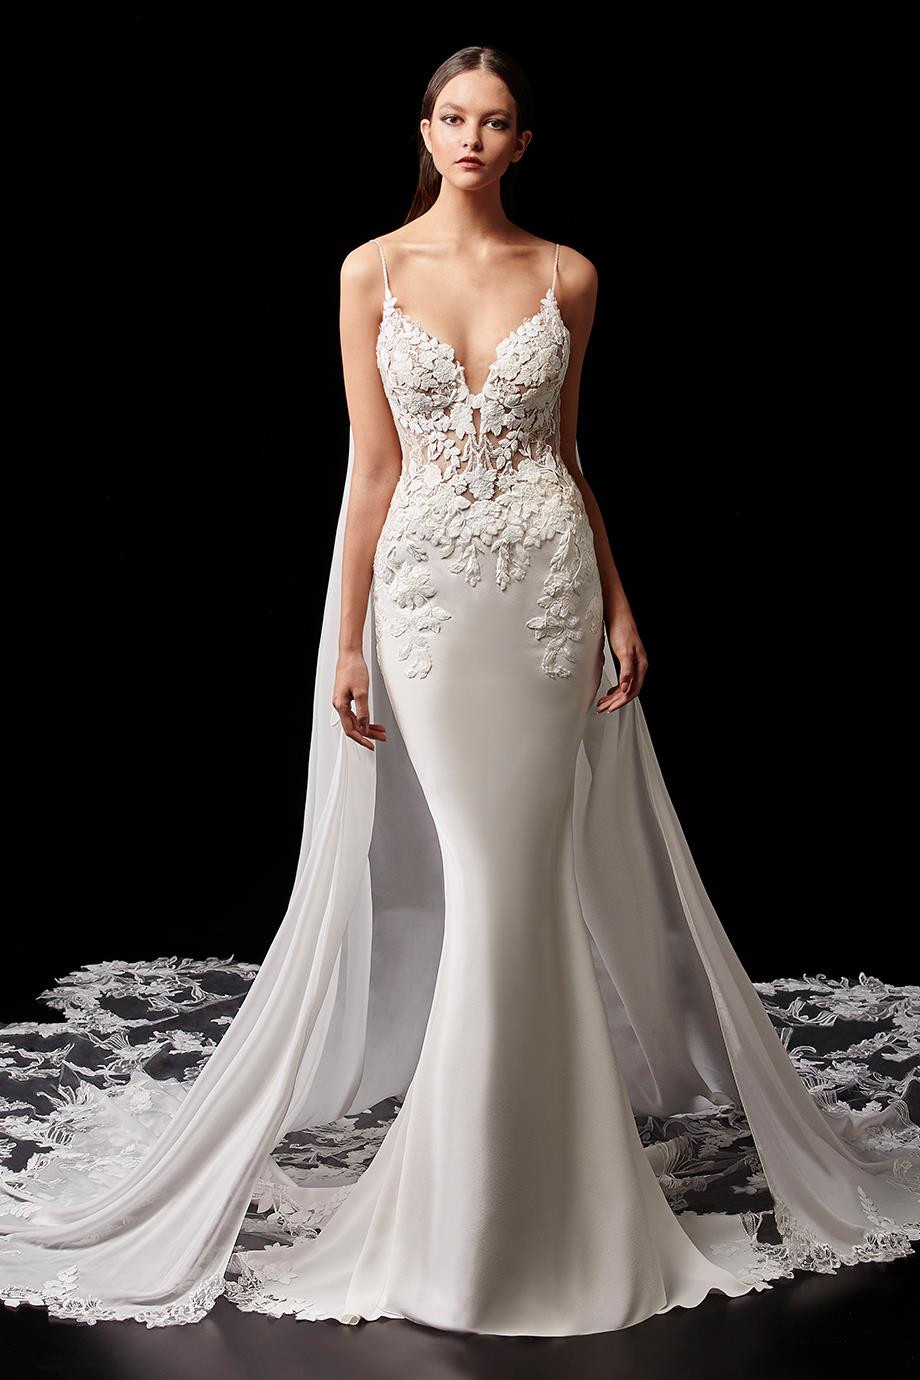 Pearl Cape Wedding Dress from Enzoani hitched.co.uk